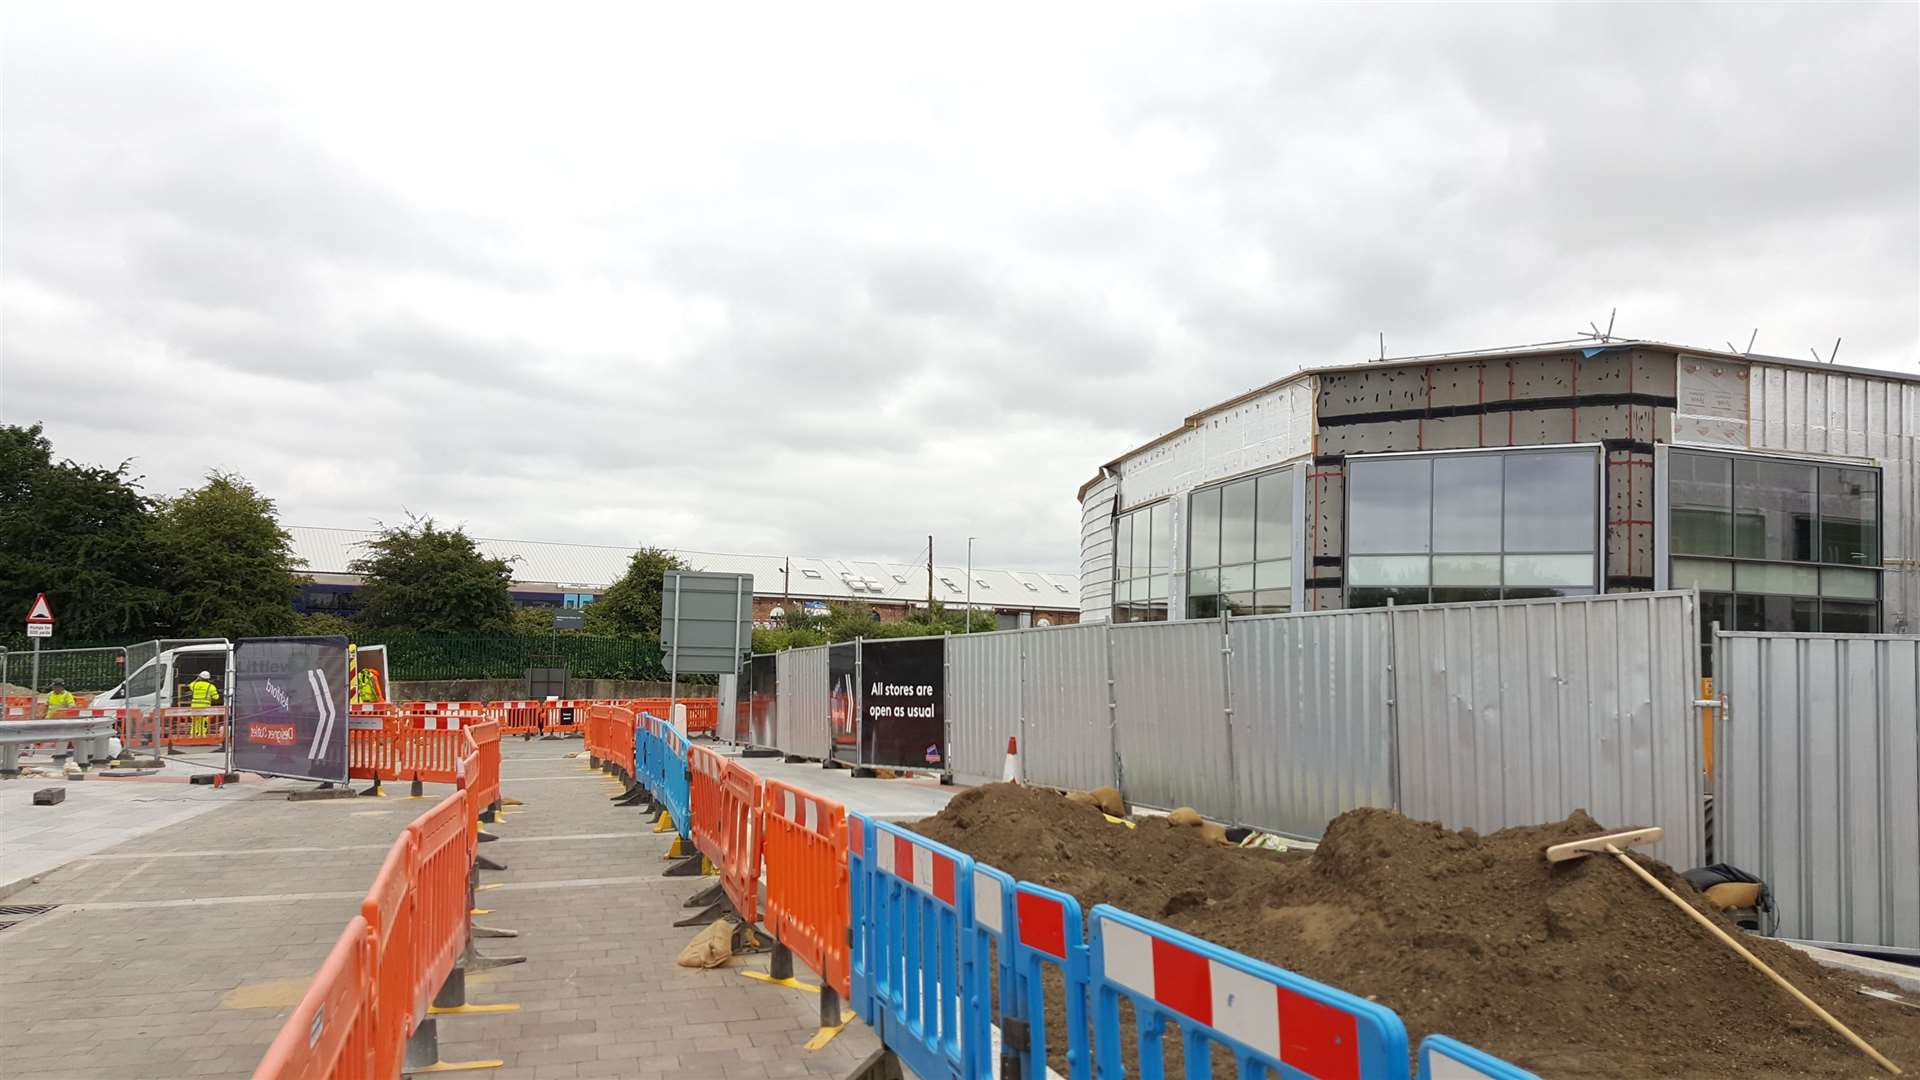 The new Designer Outlet extension is progressing